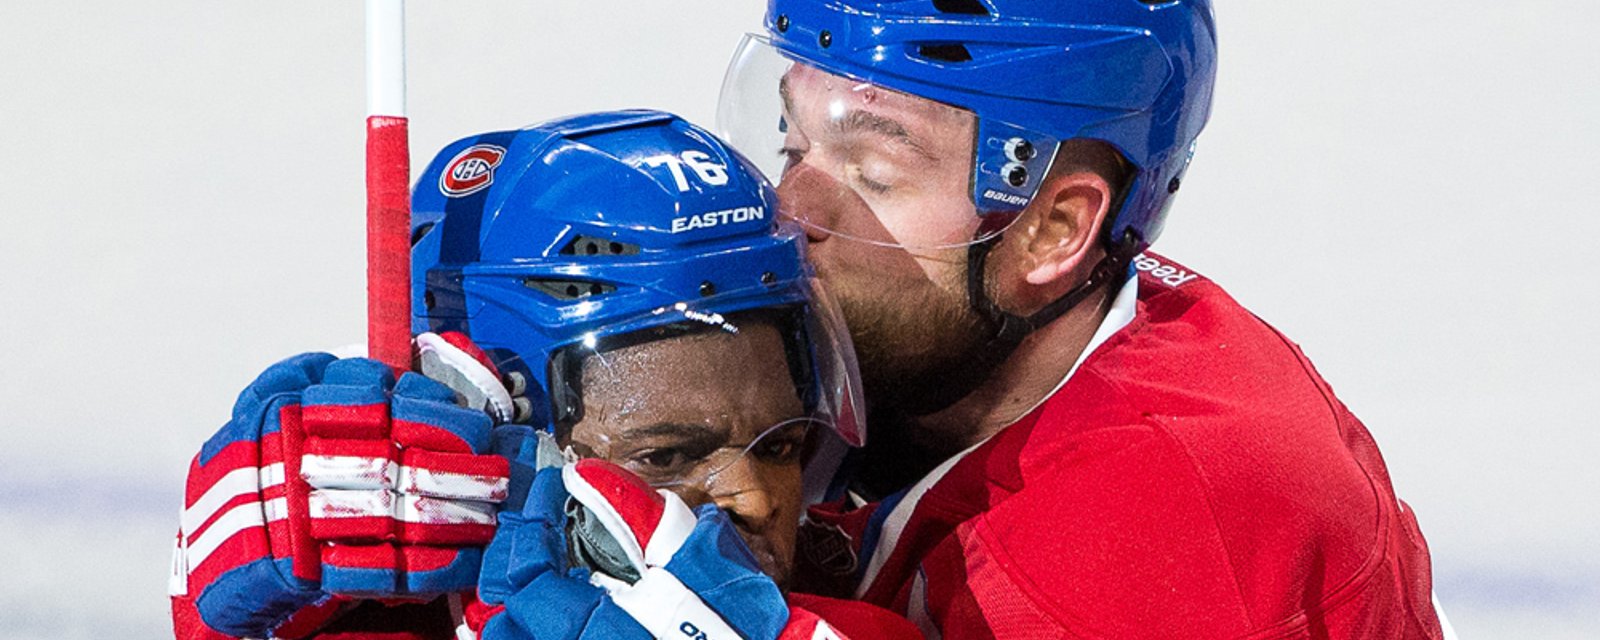 P.K. Subban’s posted a photo on Facebook and, of course, it raises controversy.